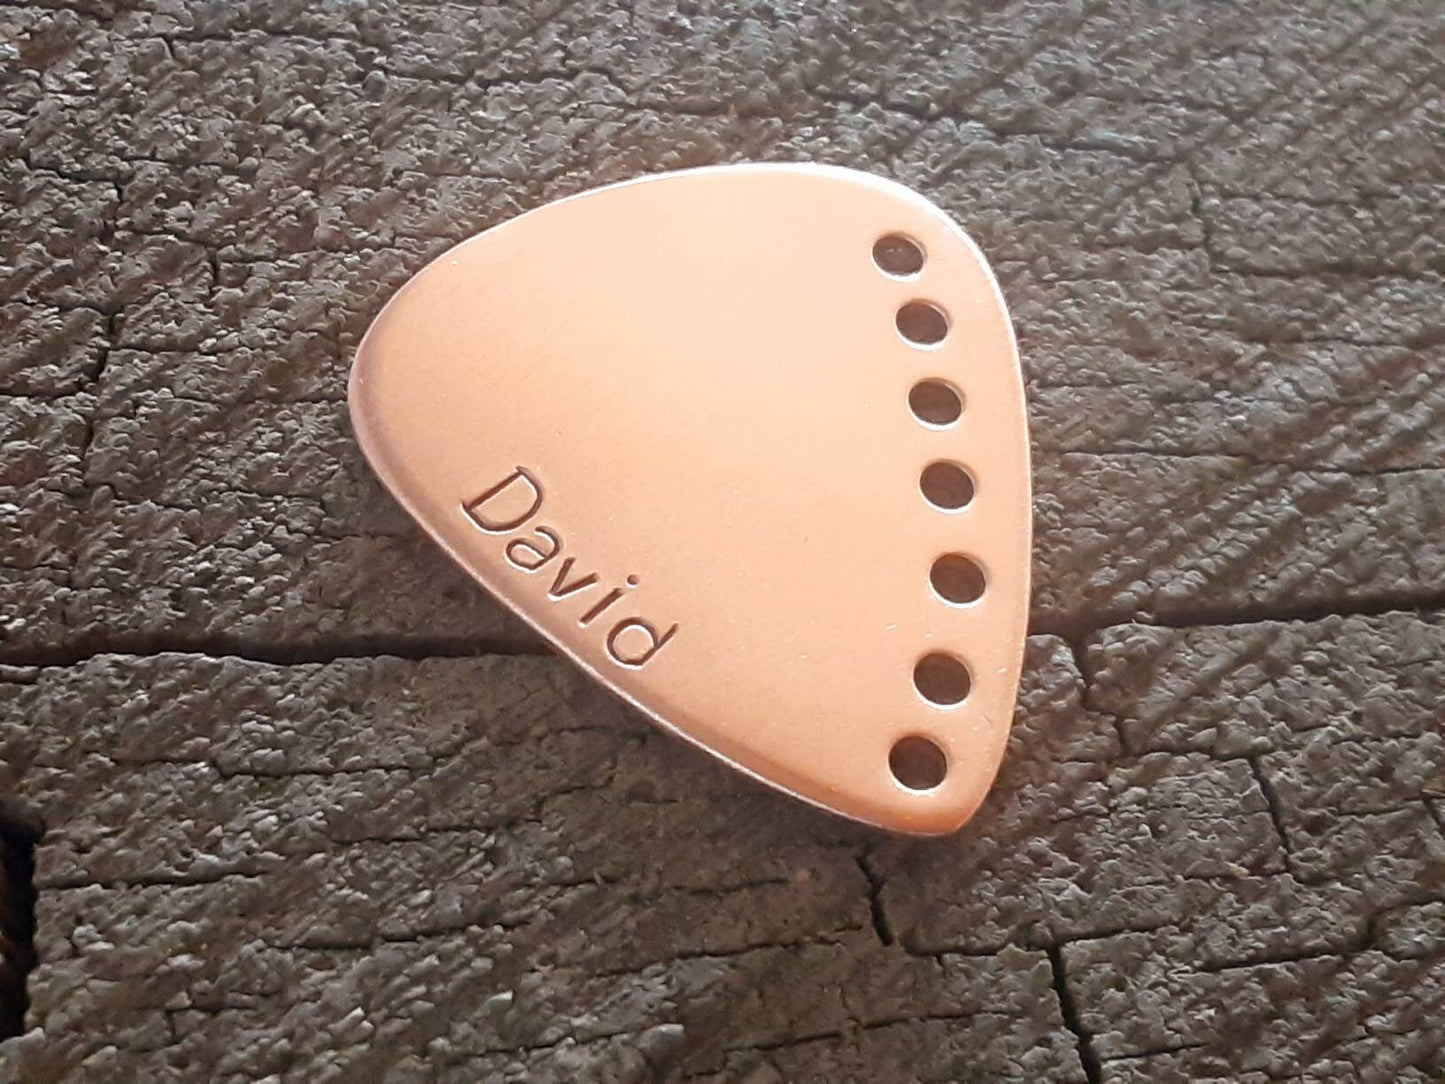 Custom copper guitar pick with holes along the edge and your name